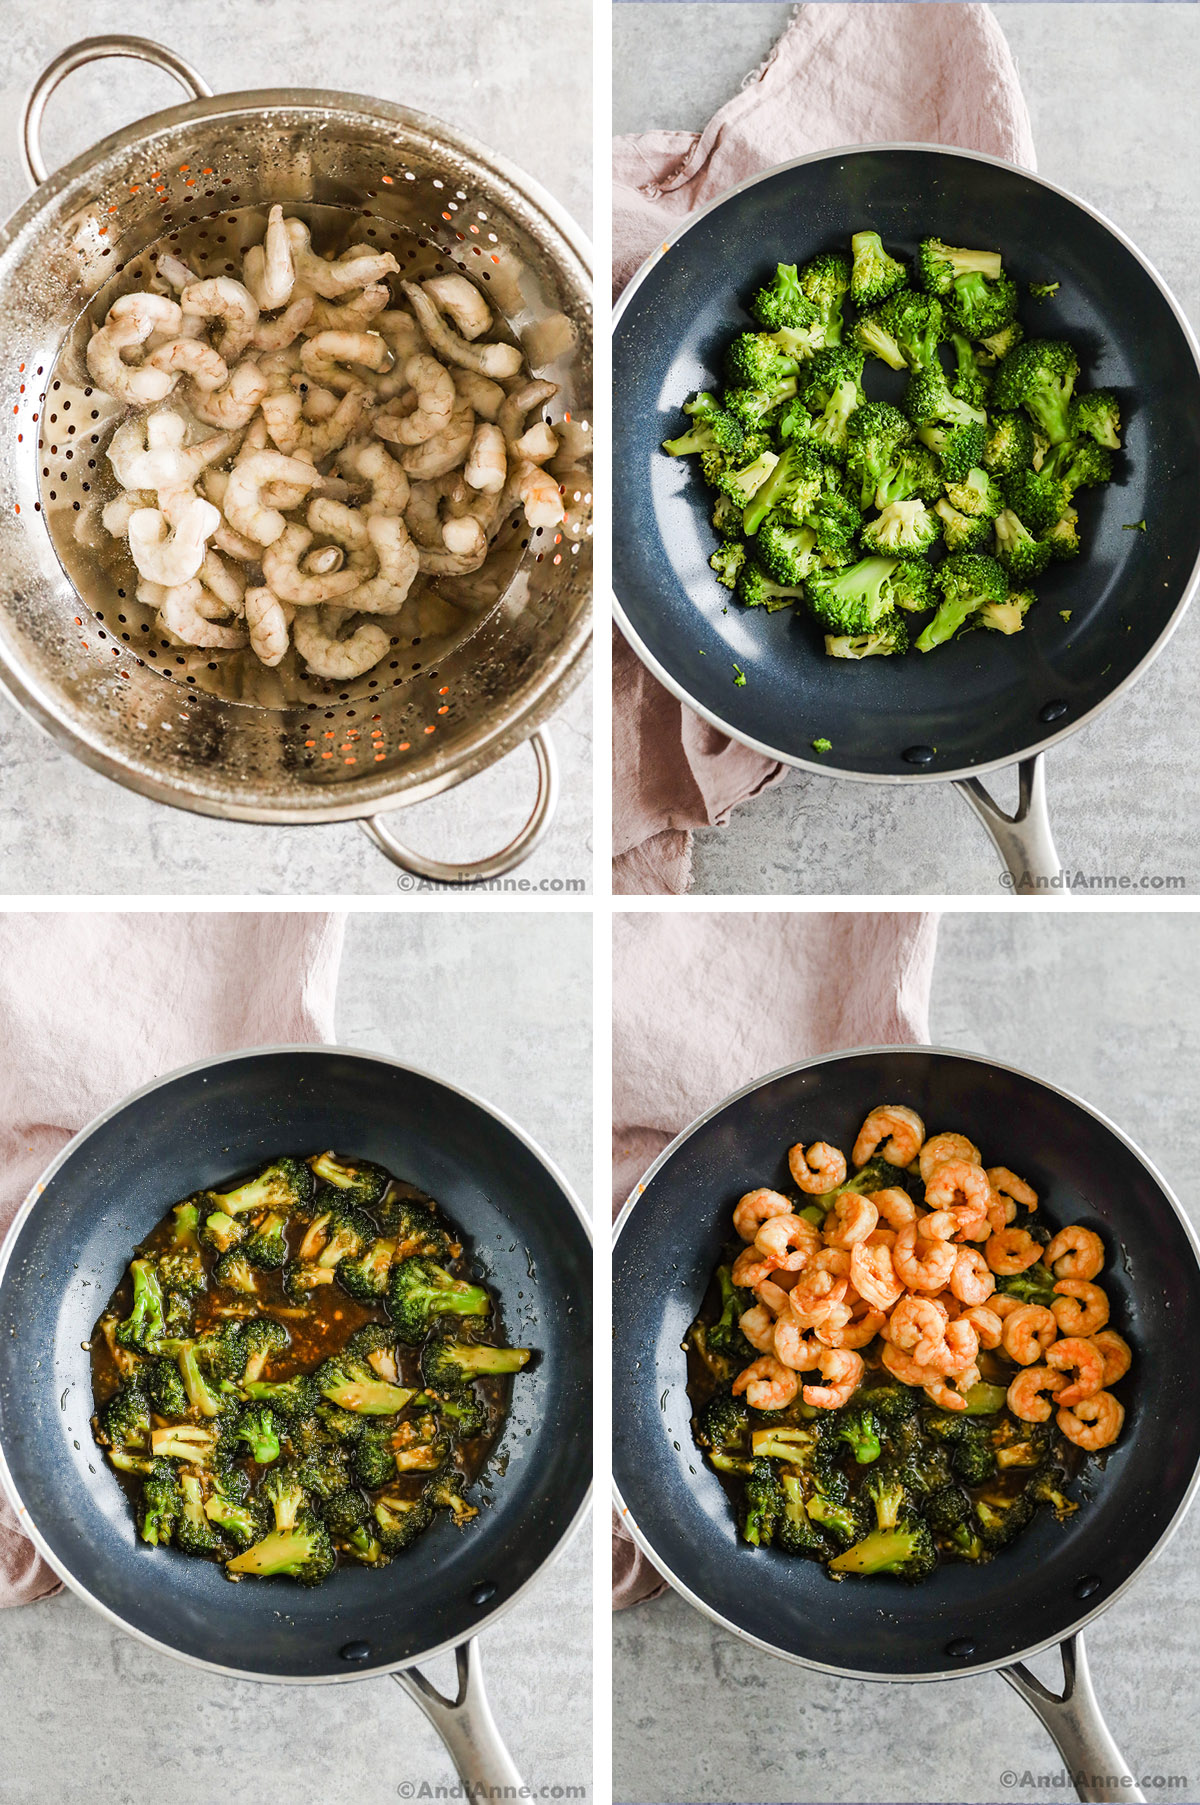 Four images showing steps ot make recipe. First is raw shrimp in water. Second is a frying pan with broccoli florets. Third is broccoli florets in honey garlic sauce. Fourth is cooked shrimp dumped on top of broccoli florets in sauce. 